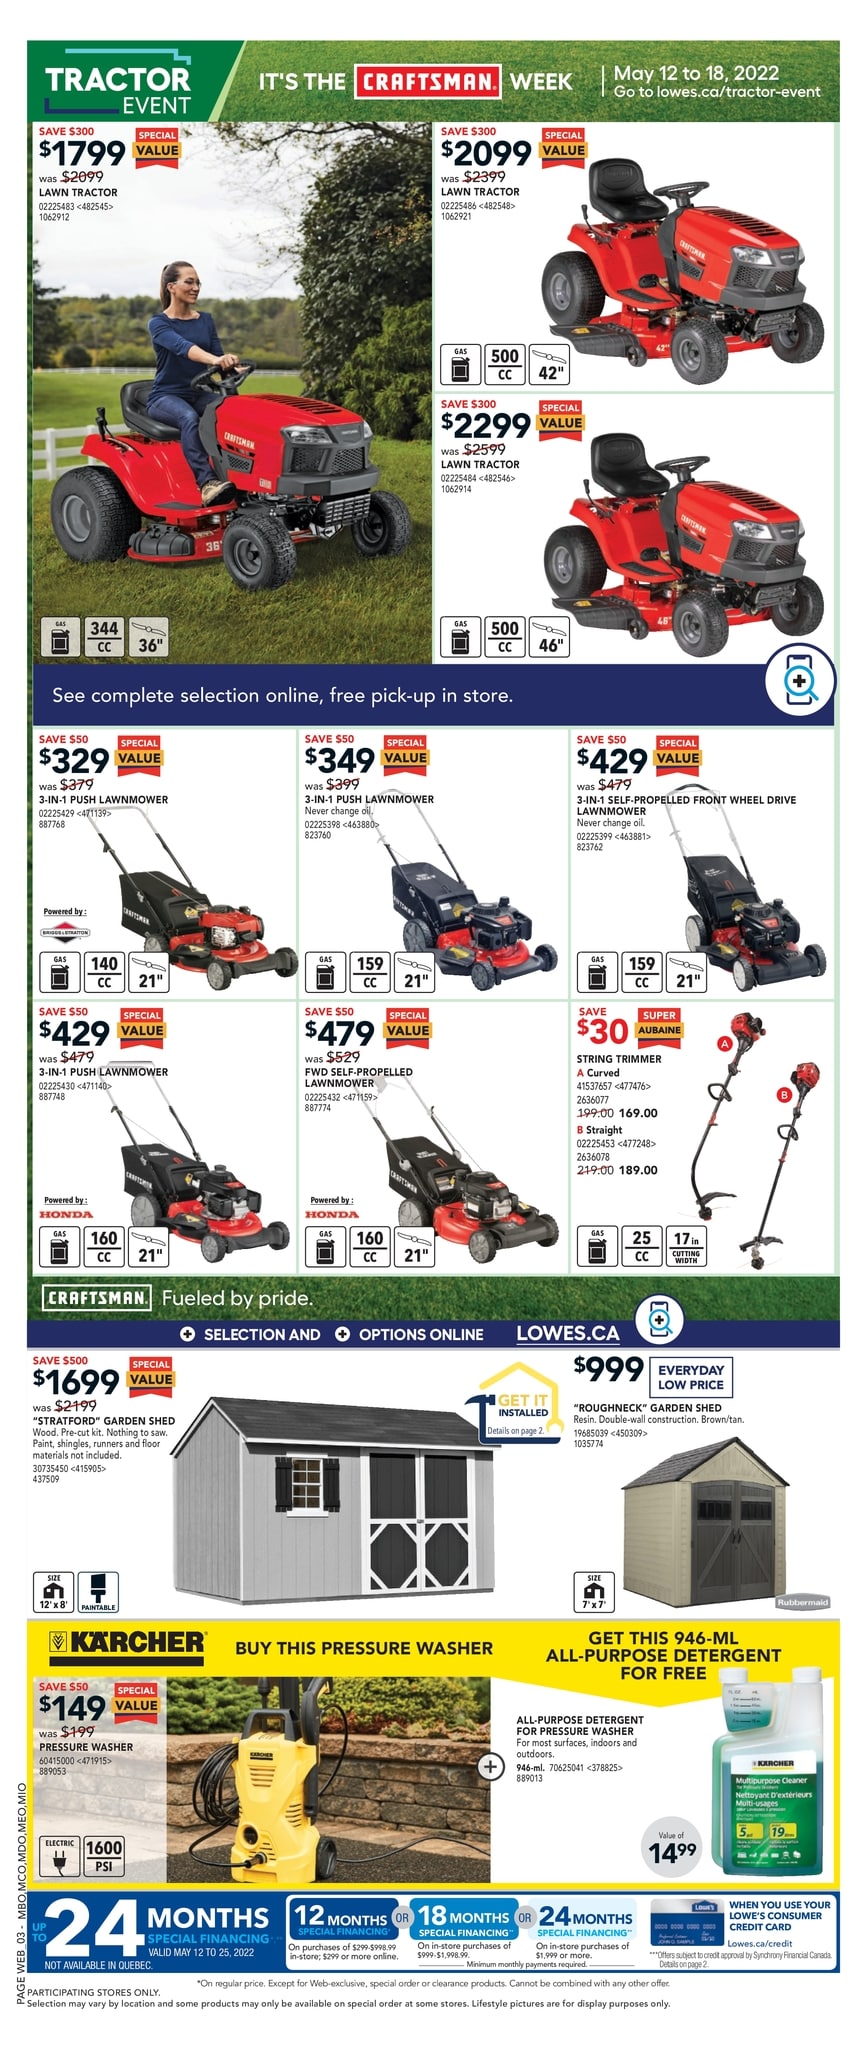 LOWE'S - Weekly Flyer Specials - Page 4